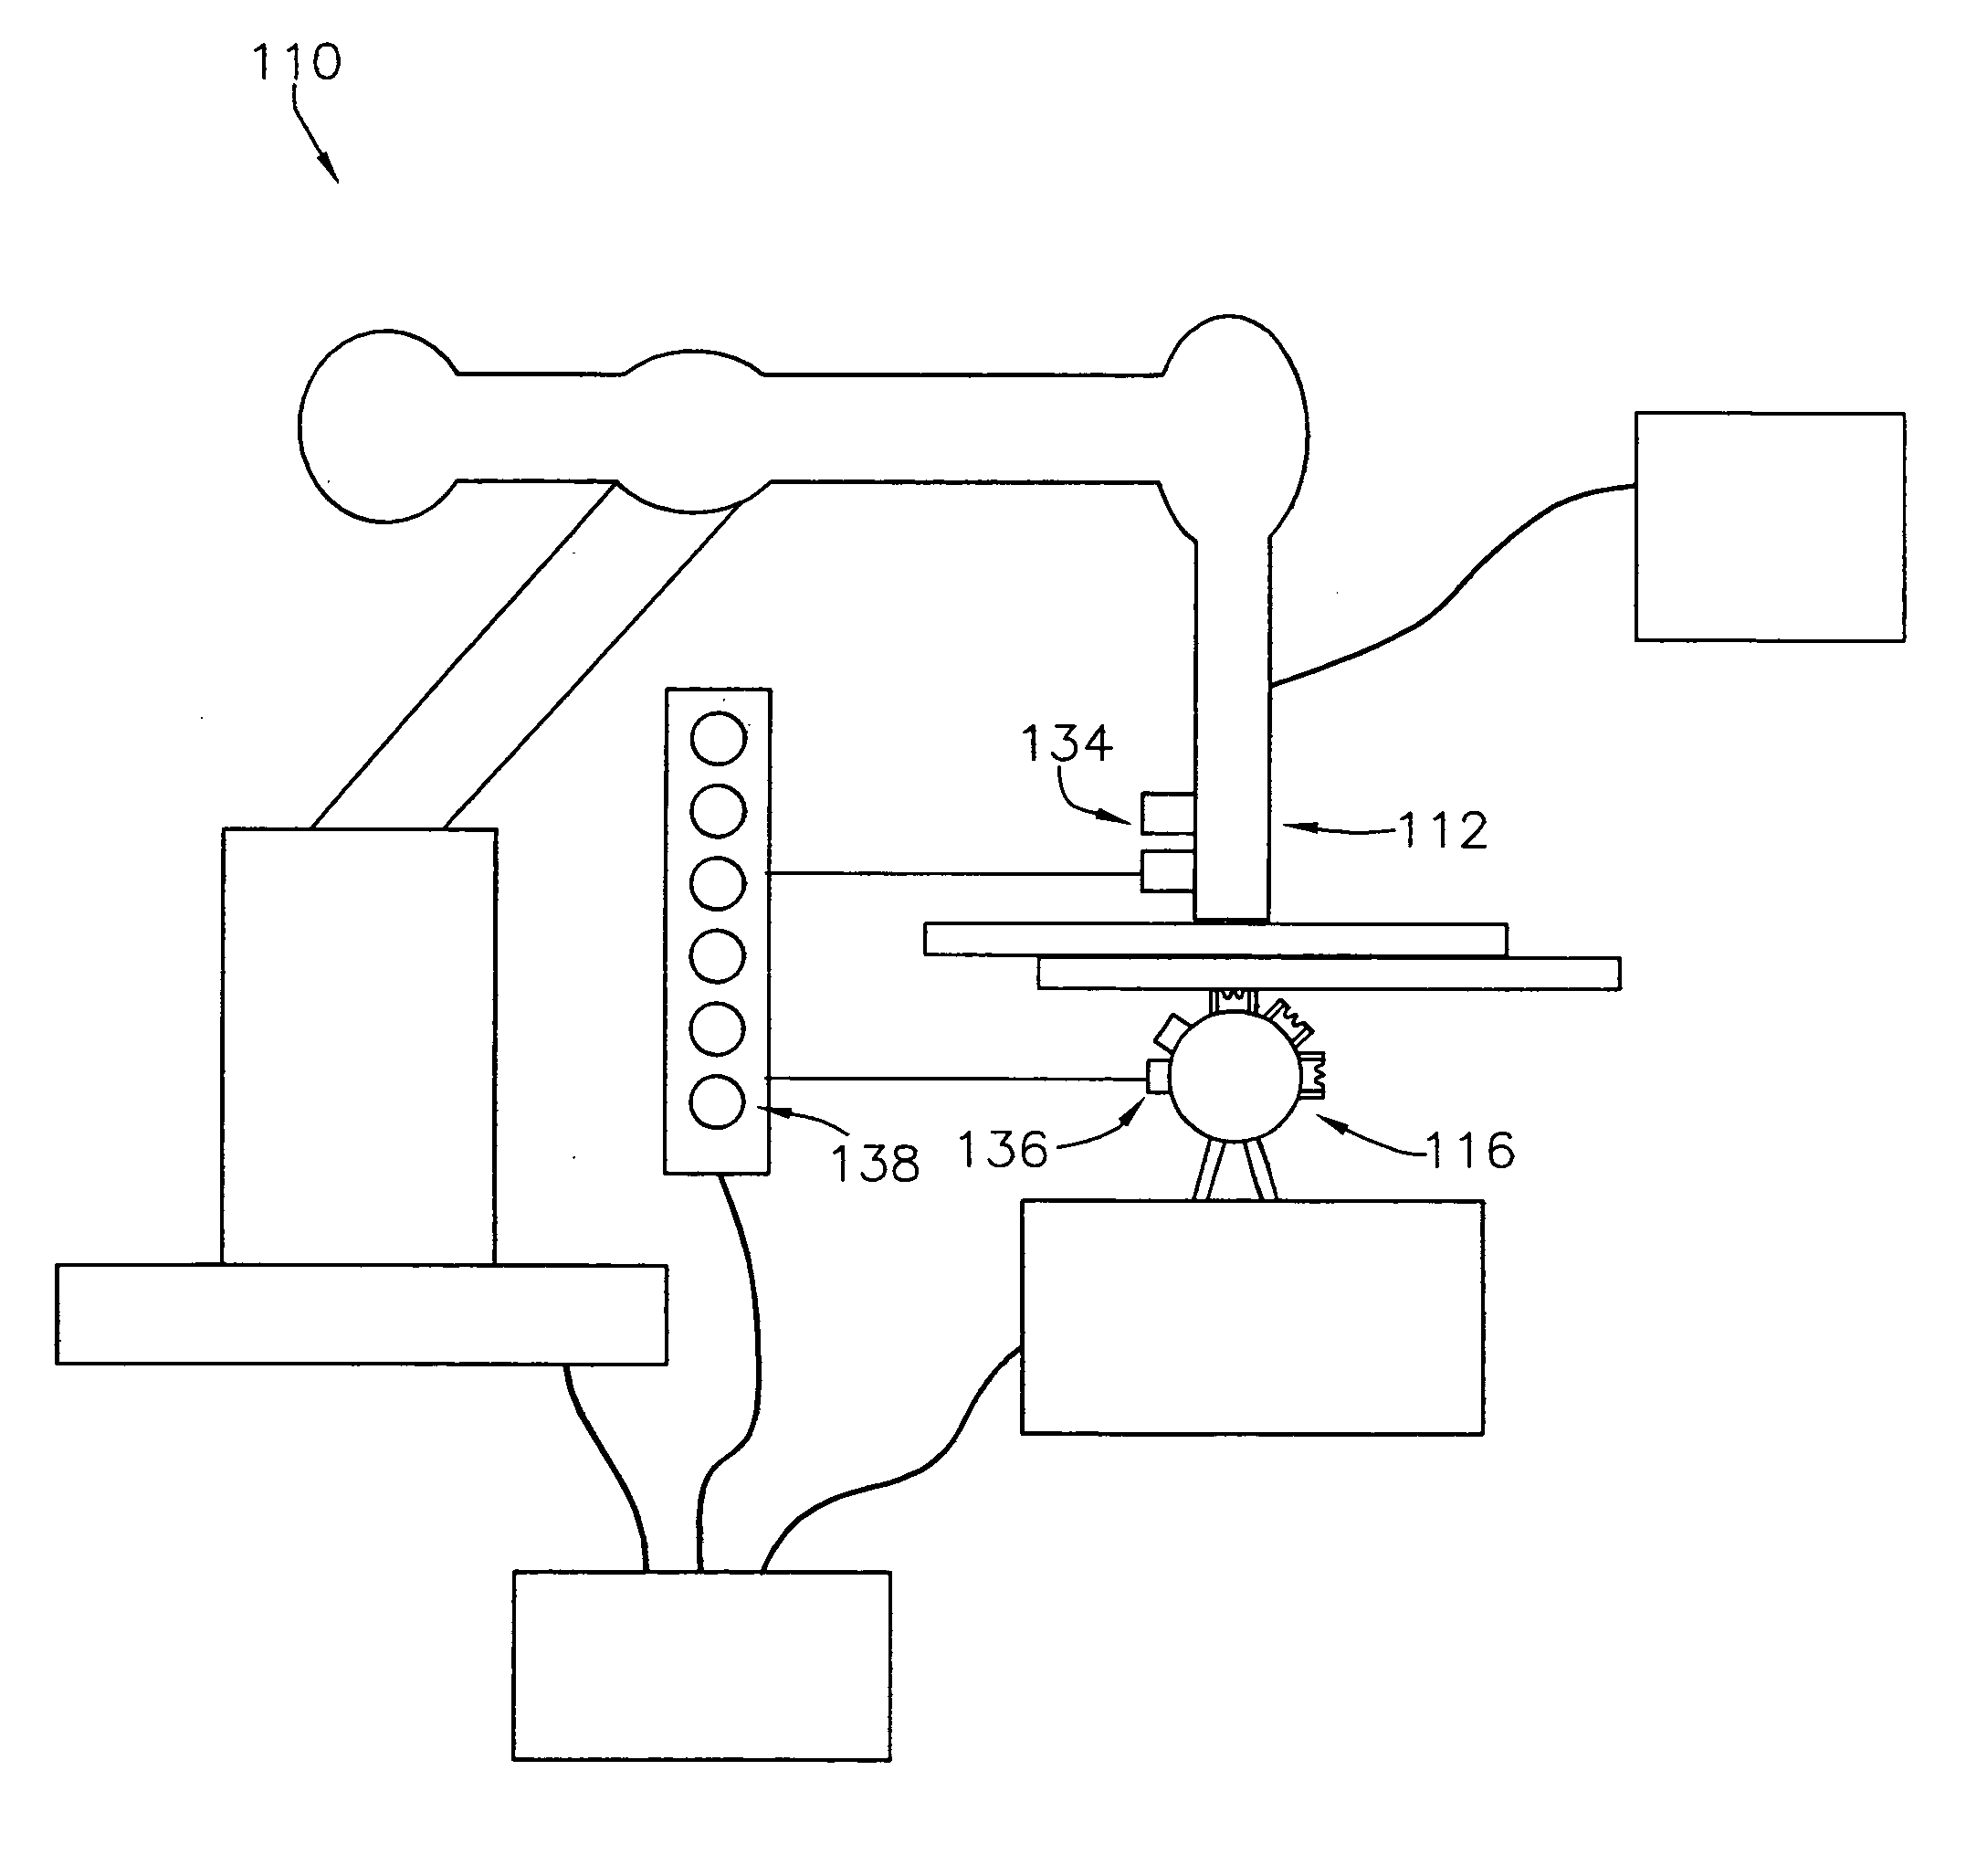 System and method for programmable pogo self-piercing riveting